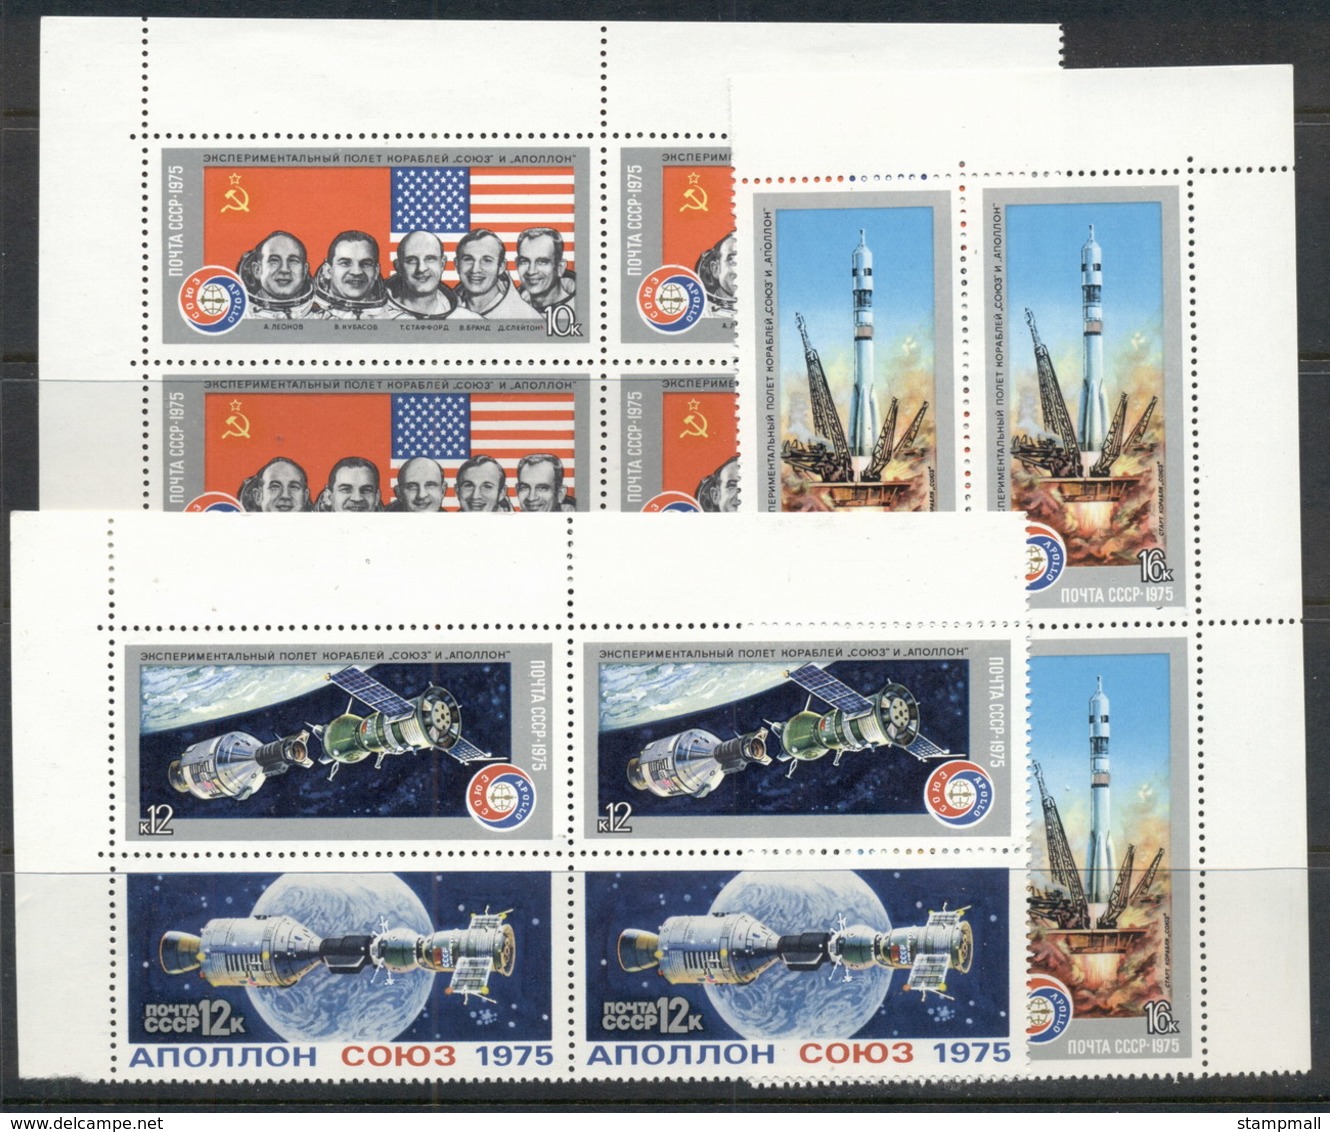 Russia 1975 Apollo-Soyuz Space Project Blk MUH - Used Stamps